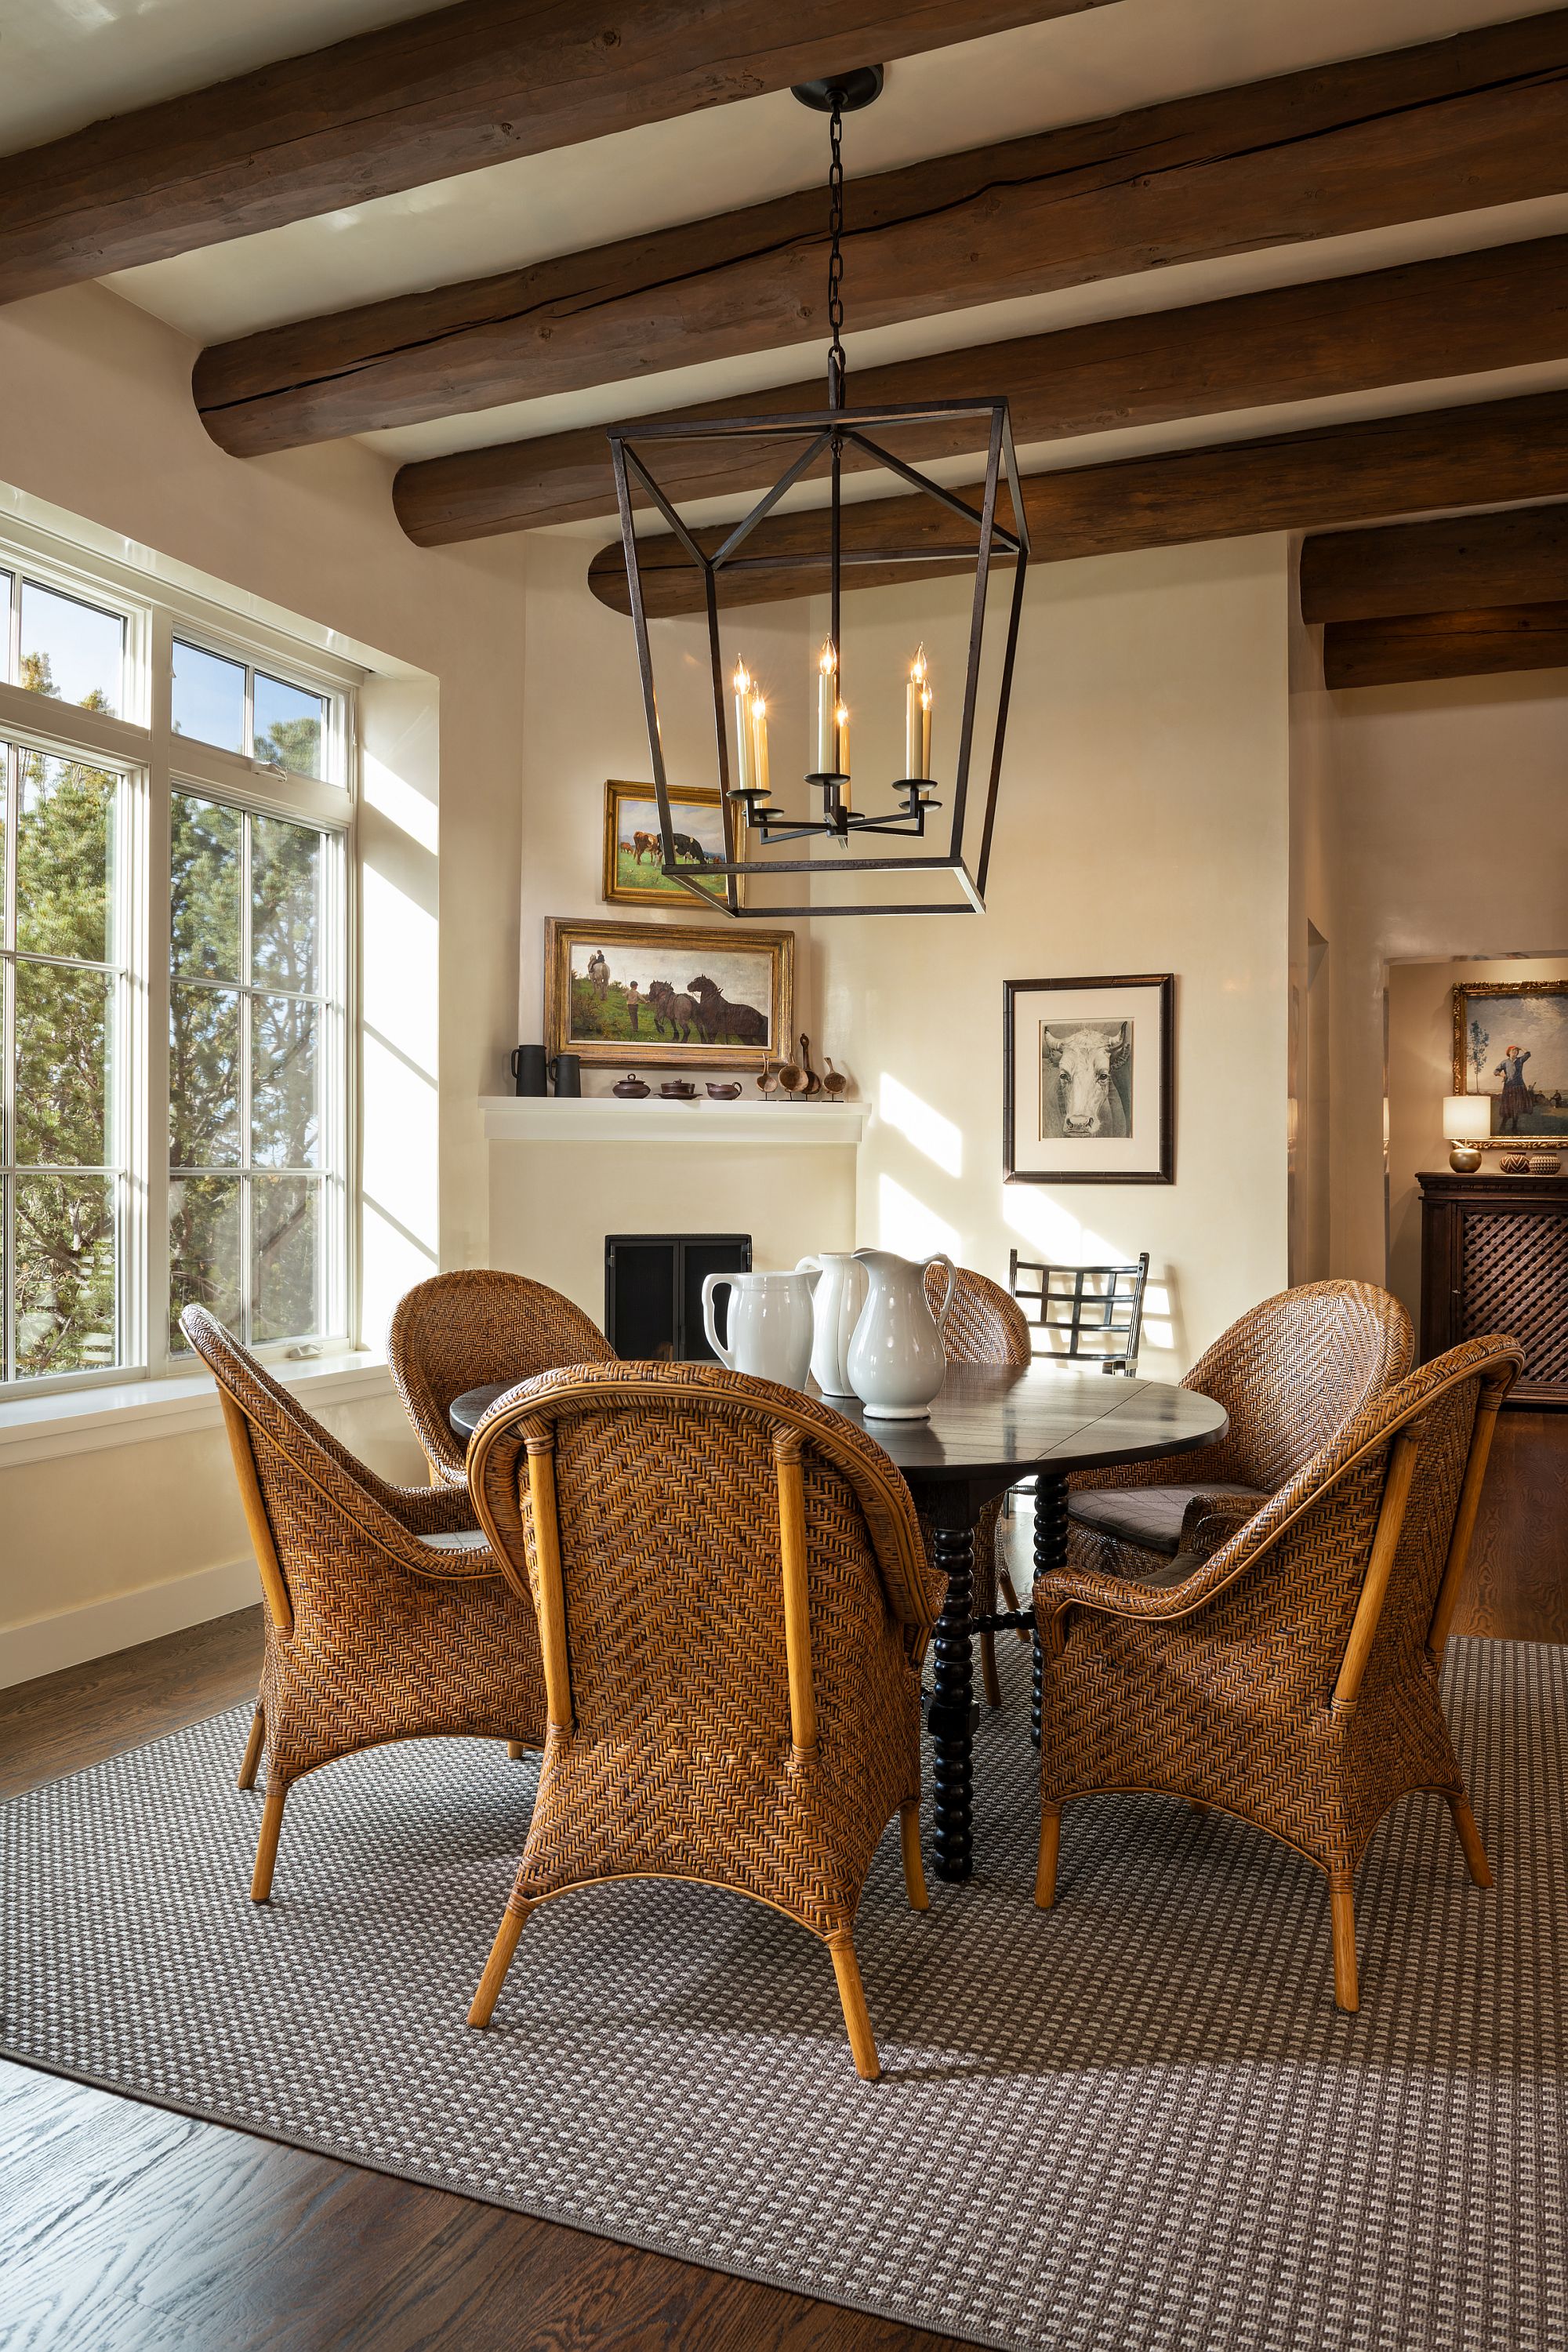 Natural finishes and ceiling wooden beams give the dining room a classic vibe